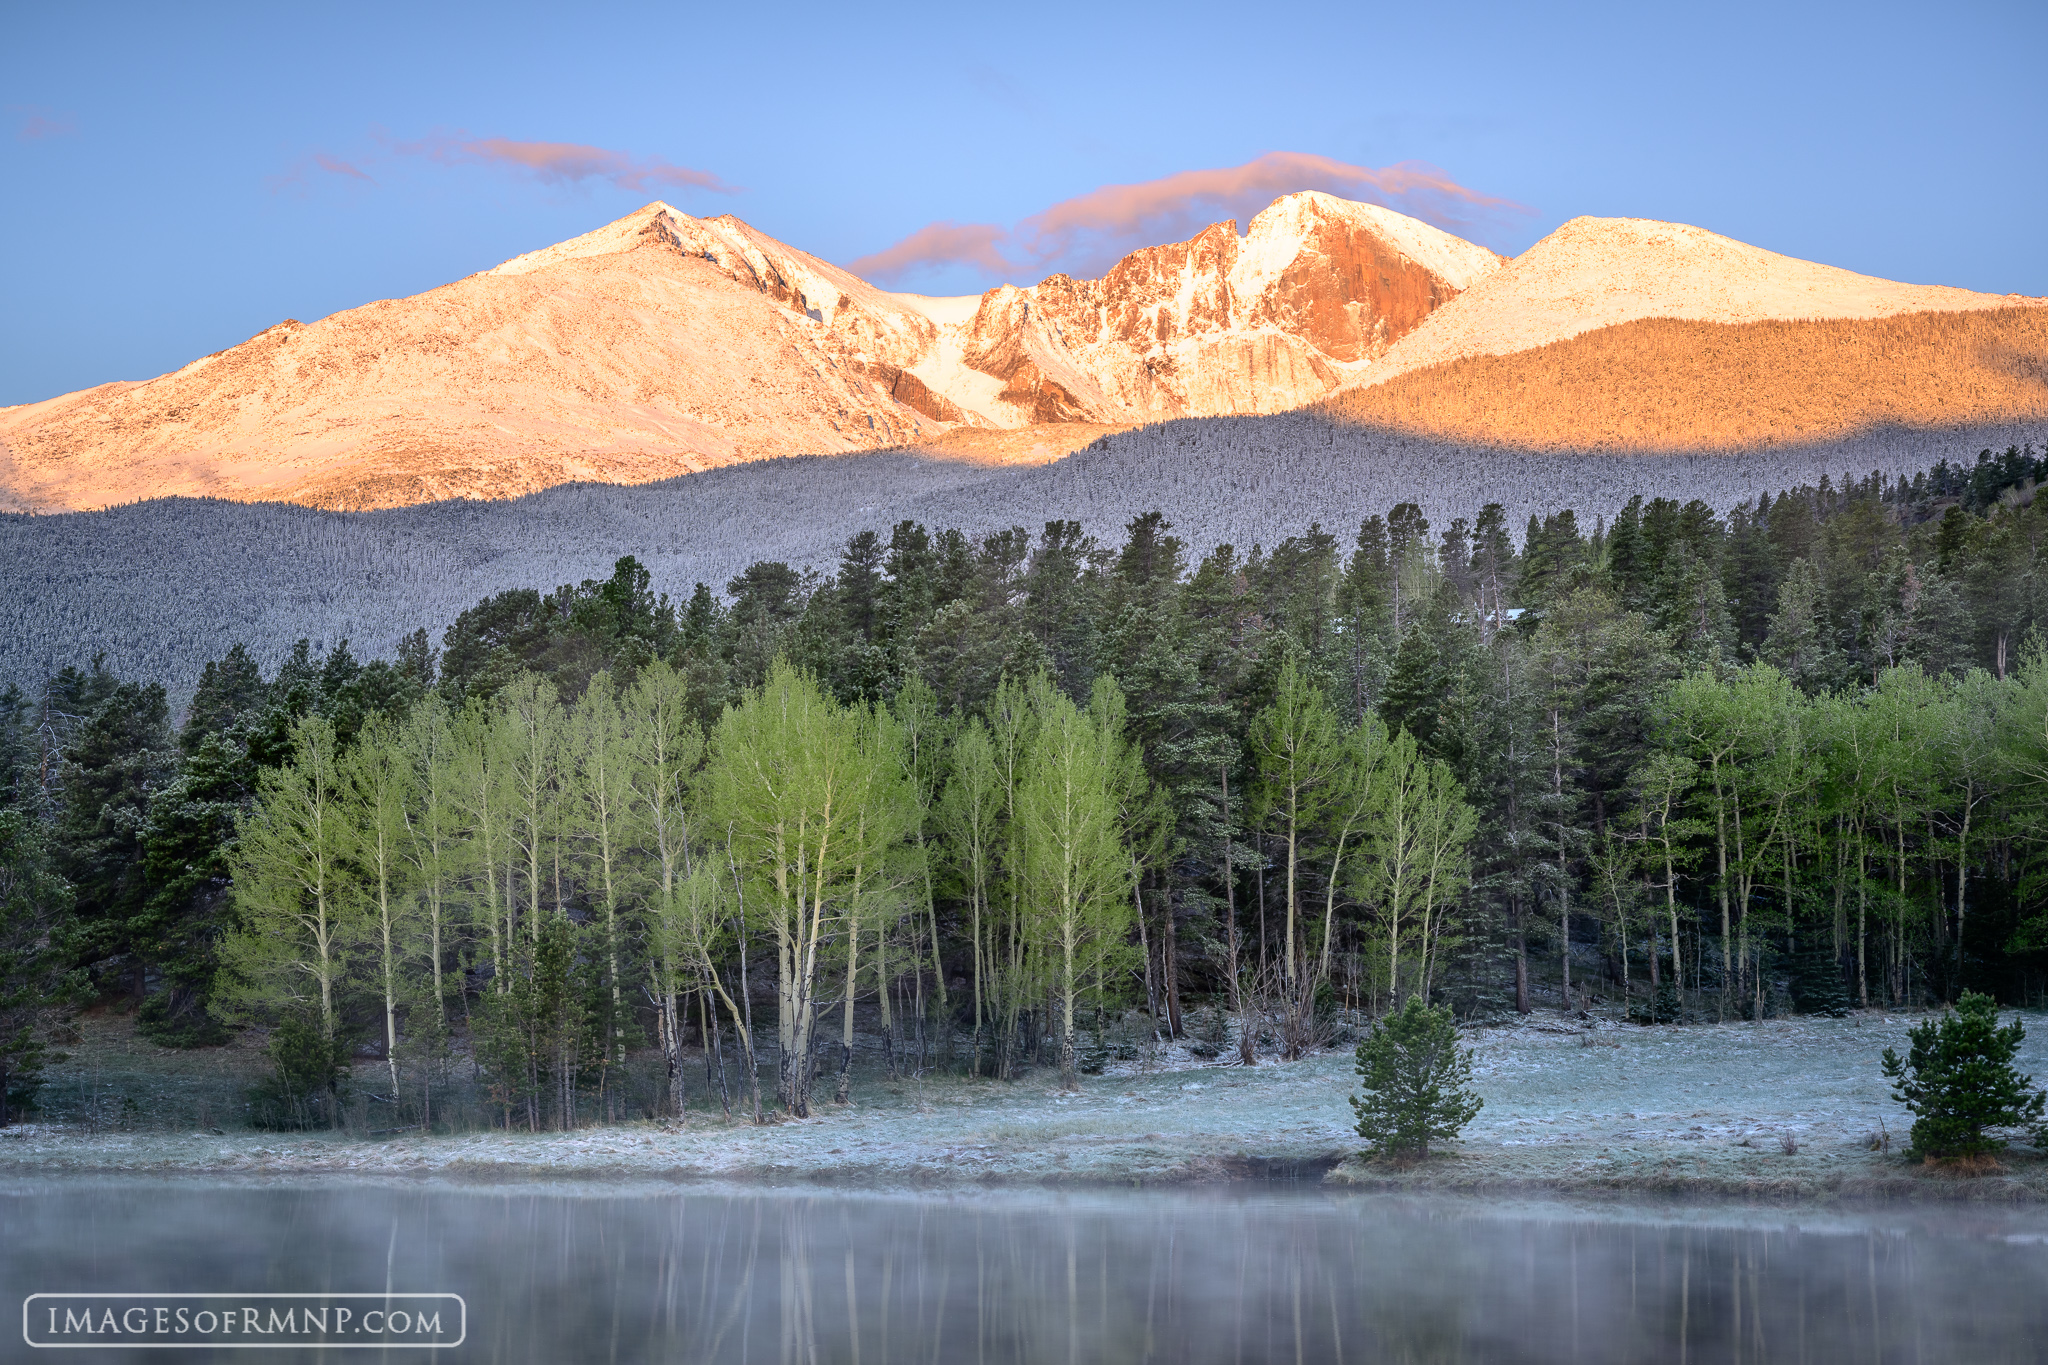 Yesterday a spring snowstorm arrived in Rocky Mountain National Park covering Mount Meeker and Longs Peak in a fresh blanket...